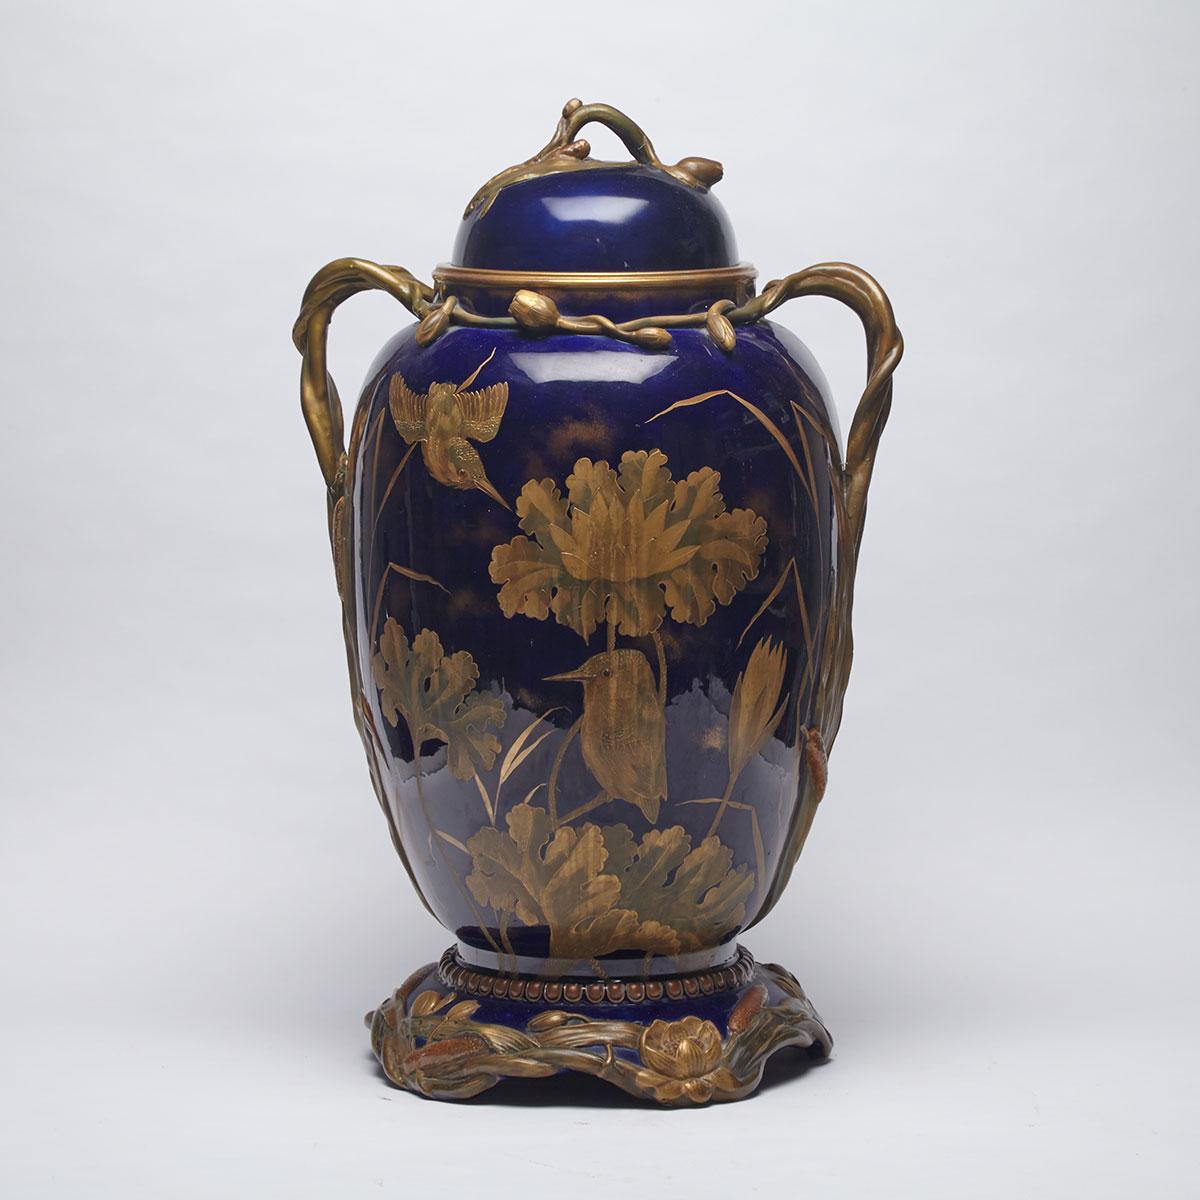 George Jones Large Two-Handled Vase with Cover and Stand, late 19th century